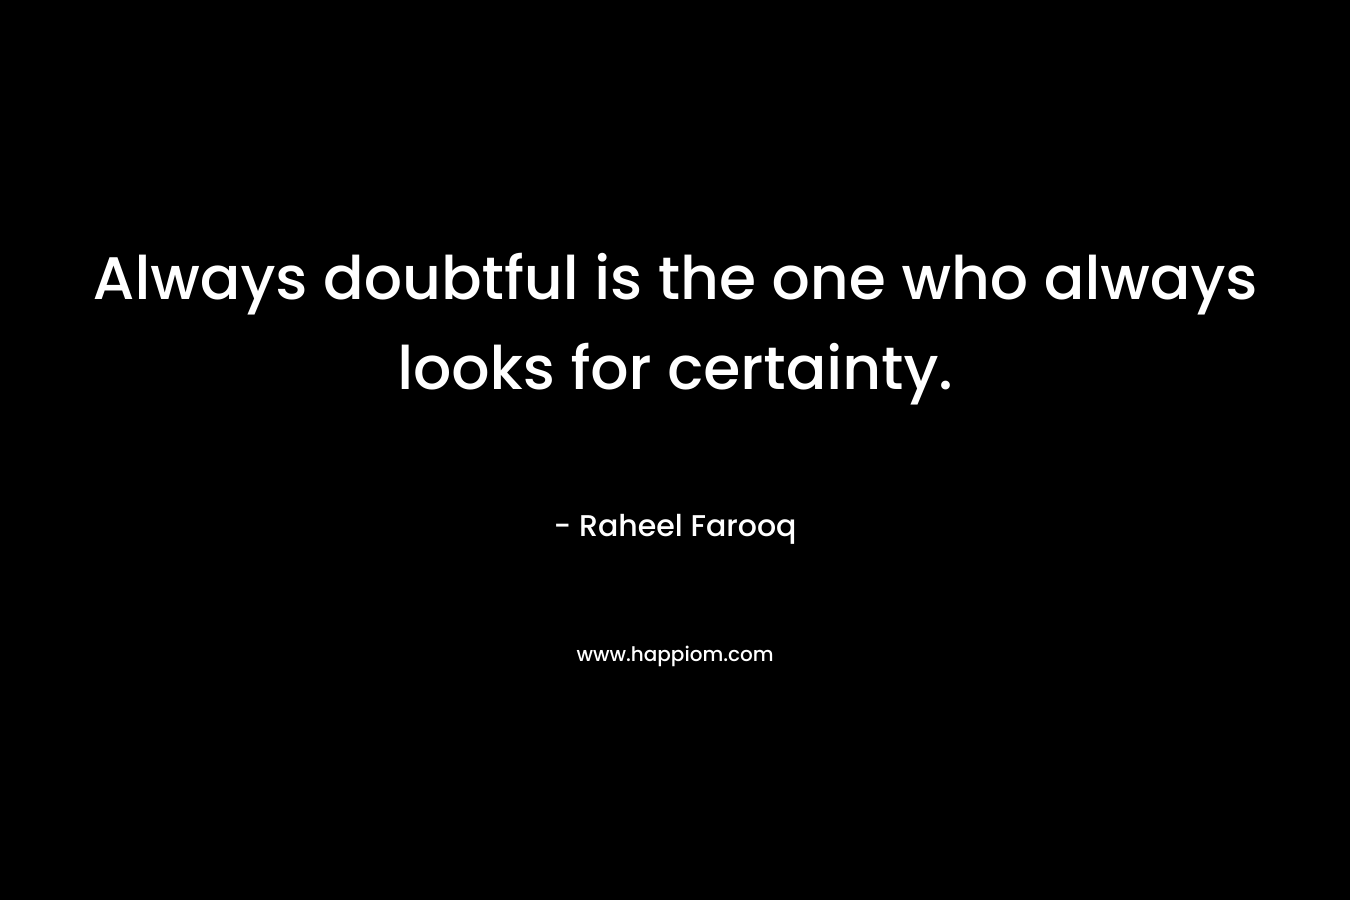 Always doubtful is the one who always looks for certainty. – Raheel Farooq